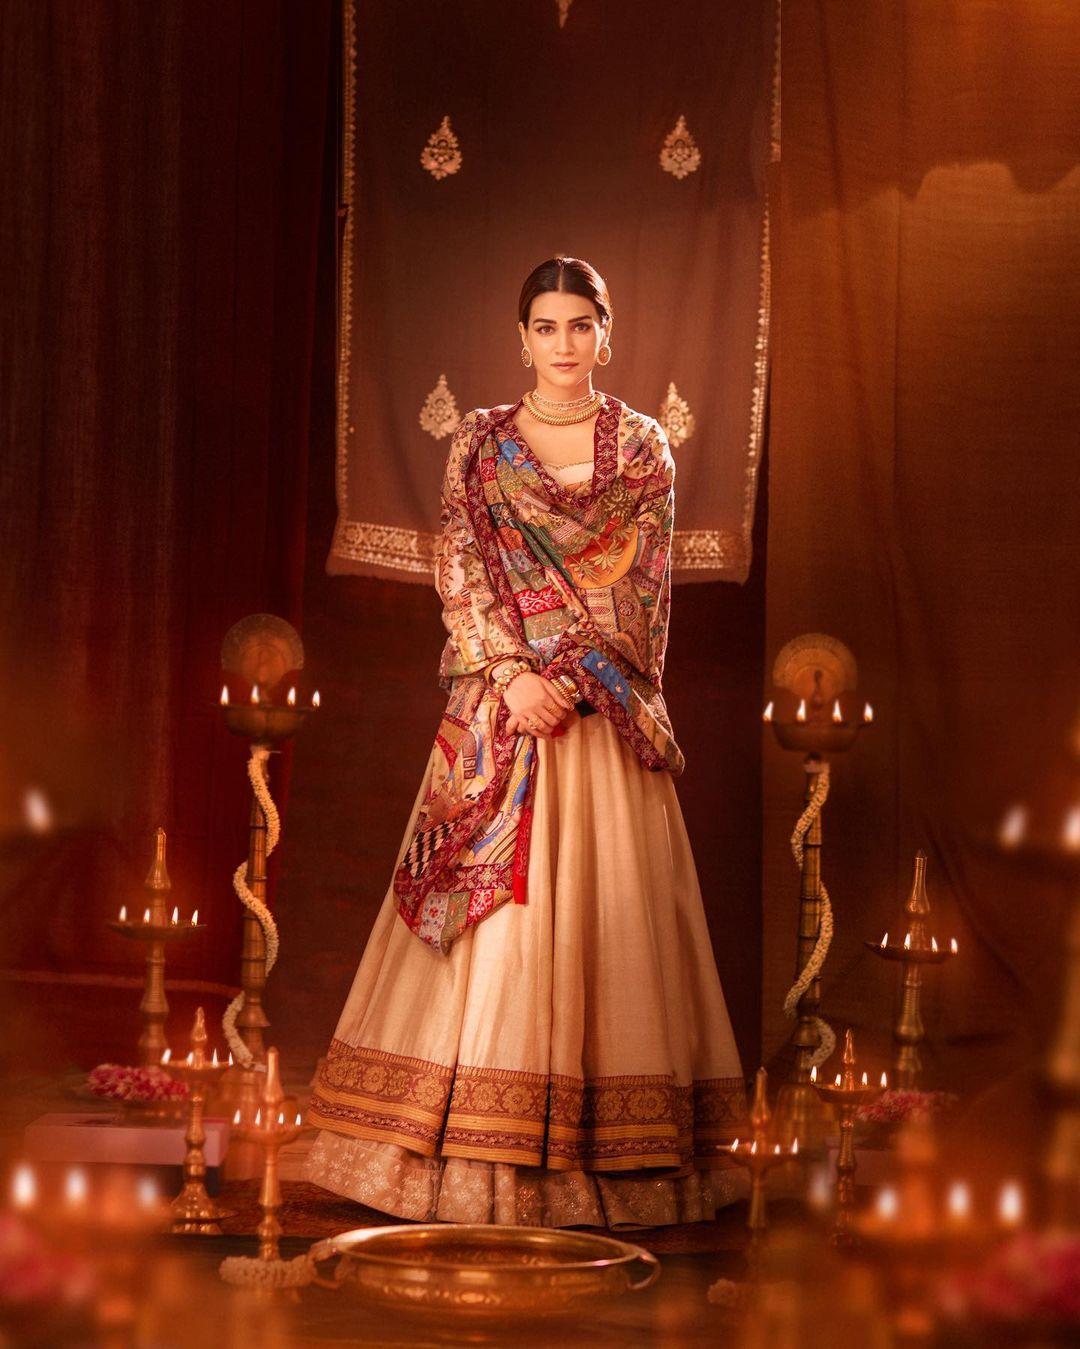 Kriti casts a spell in a custom-made beige lehenga suit crafted by Sukriti and Akriti Grover. The ensemble is a dreamy fusion of tradition and modernity, boasting an anarkali top paired meticulously with a lehenga and a dupatta adorned with a rustic pink border.